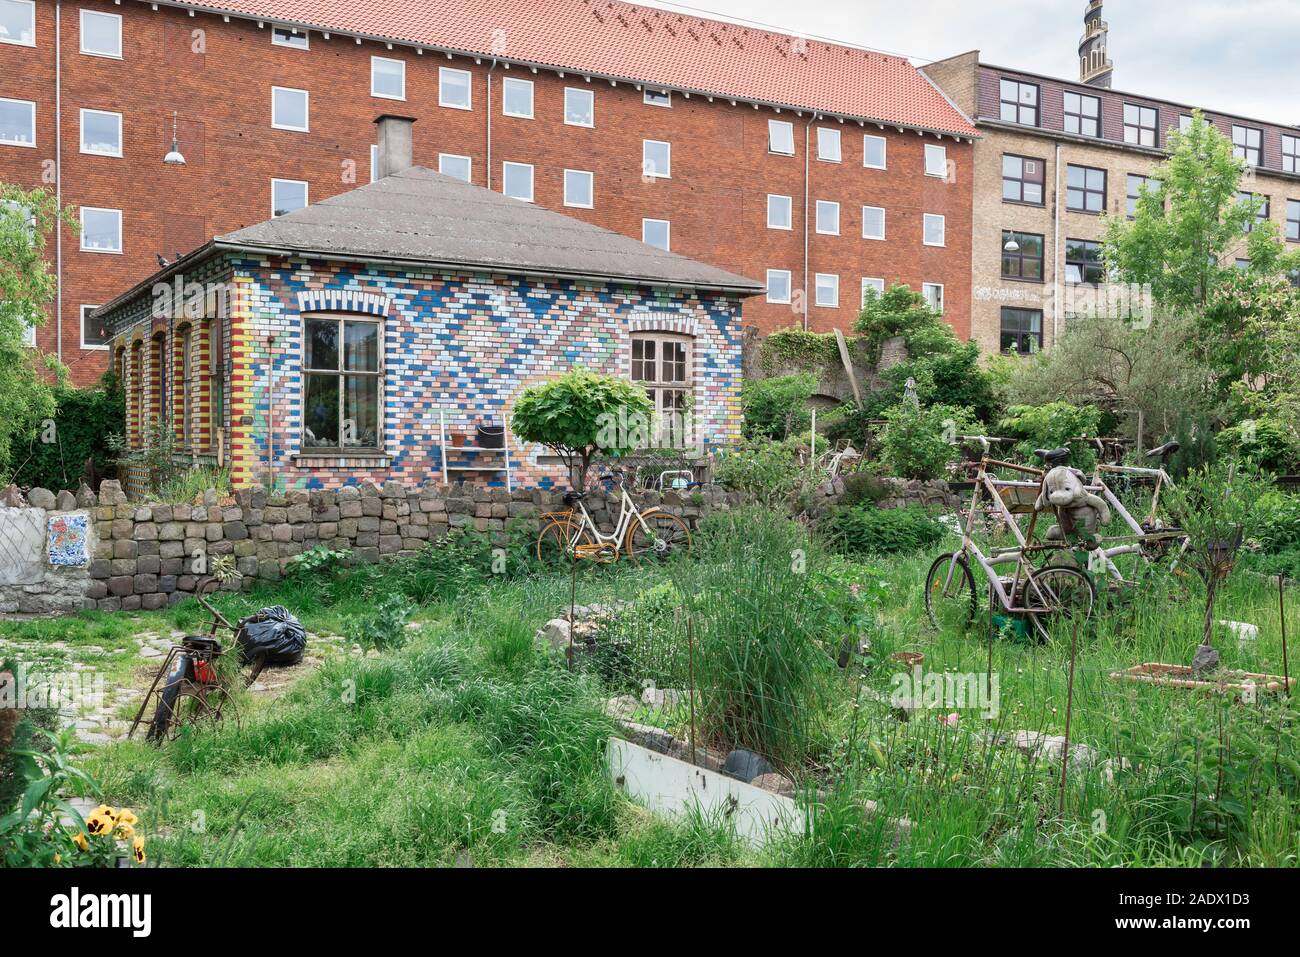 Christiania Copenhagen, view of a colorful tiled building, garden and abandoned bicycles in the alternative Freetown area of Christiania, Copenhagen. Stock Photo